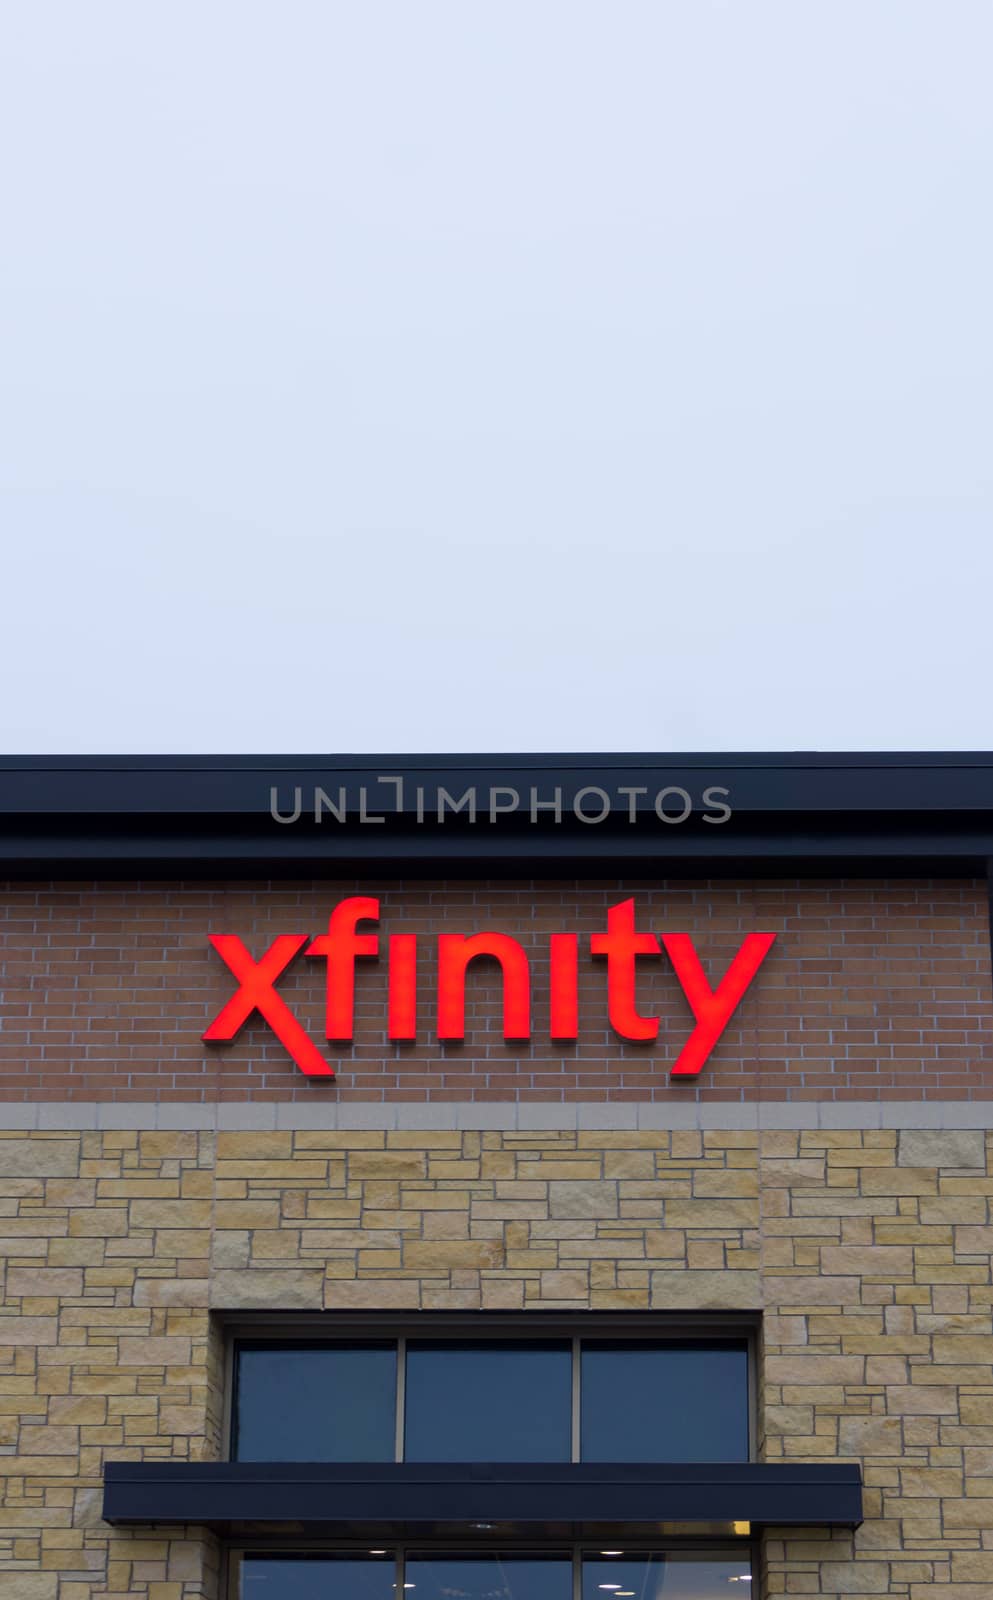 MAPLEWOOD, MN/USA - JANUARY 20, 2015: Xfinity retail store and sign. Xfinity provides cable television, broadband internet, and voip telephone.